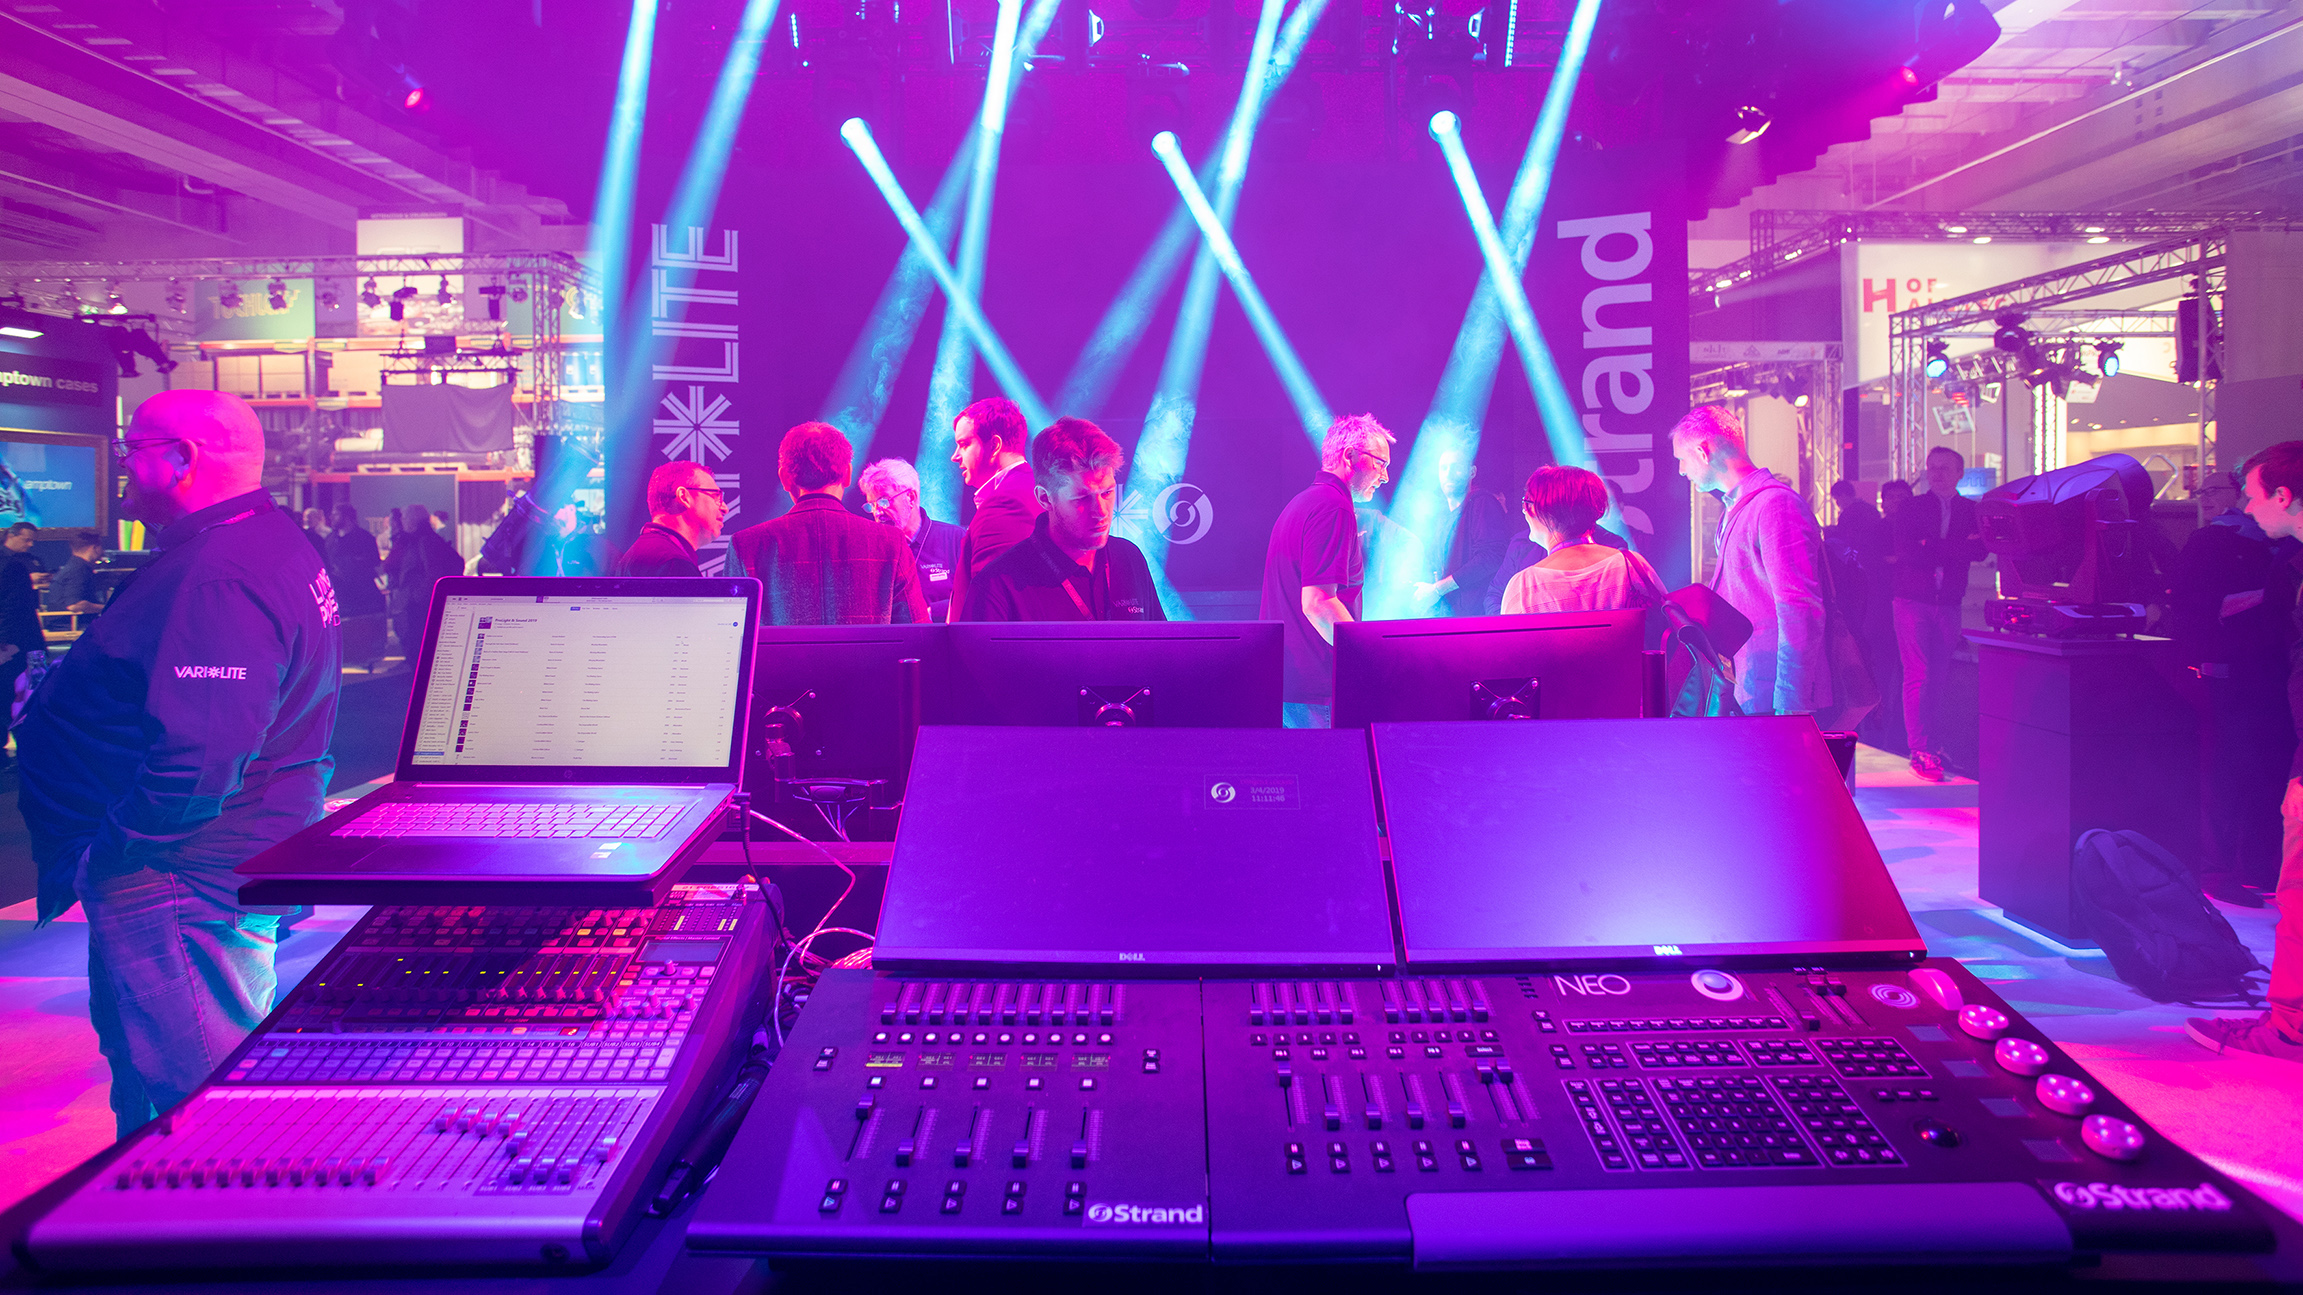 Show and stage lighting and entertainment technology at Prolight + Sound